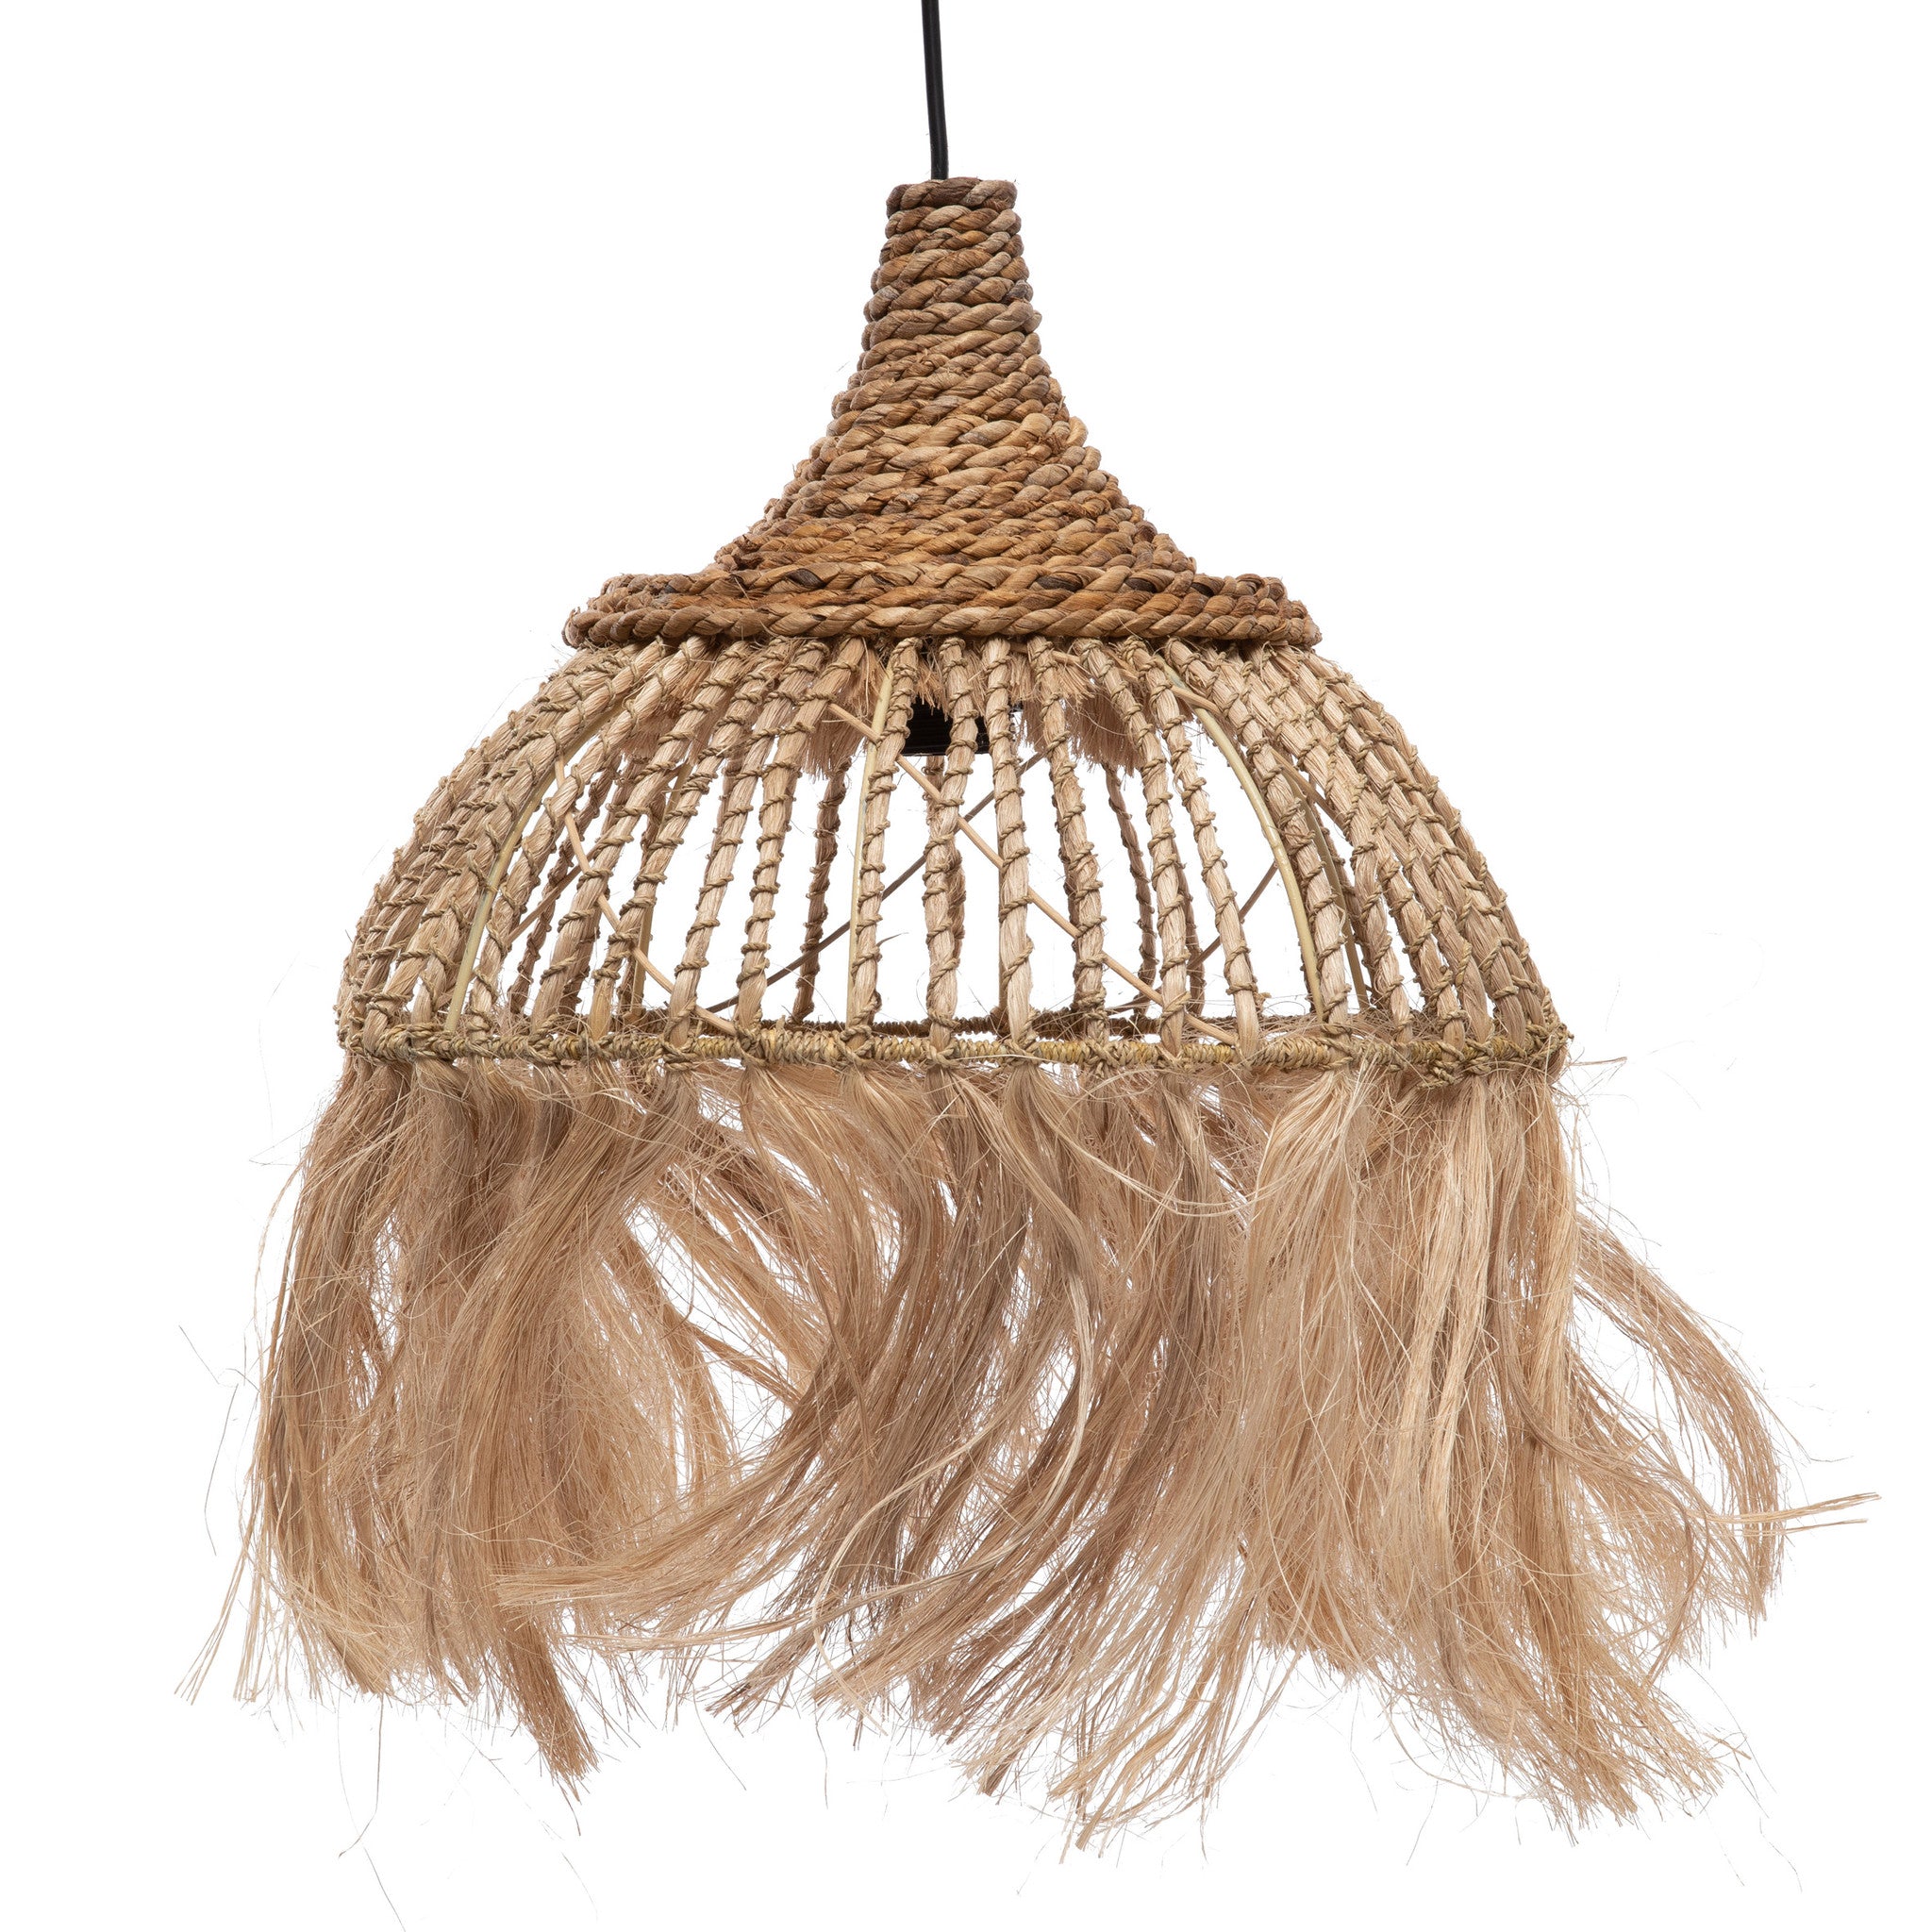 THE ABACA LOTUS Pendant front view